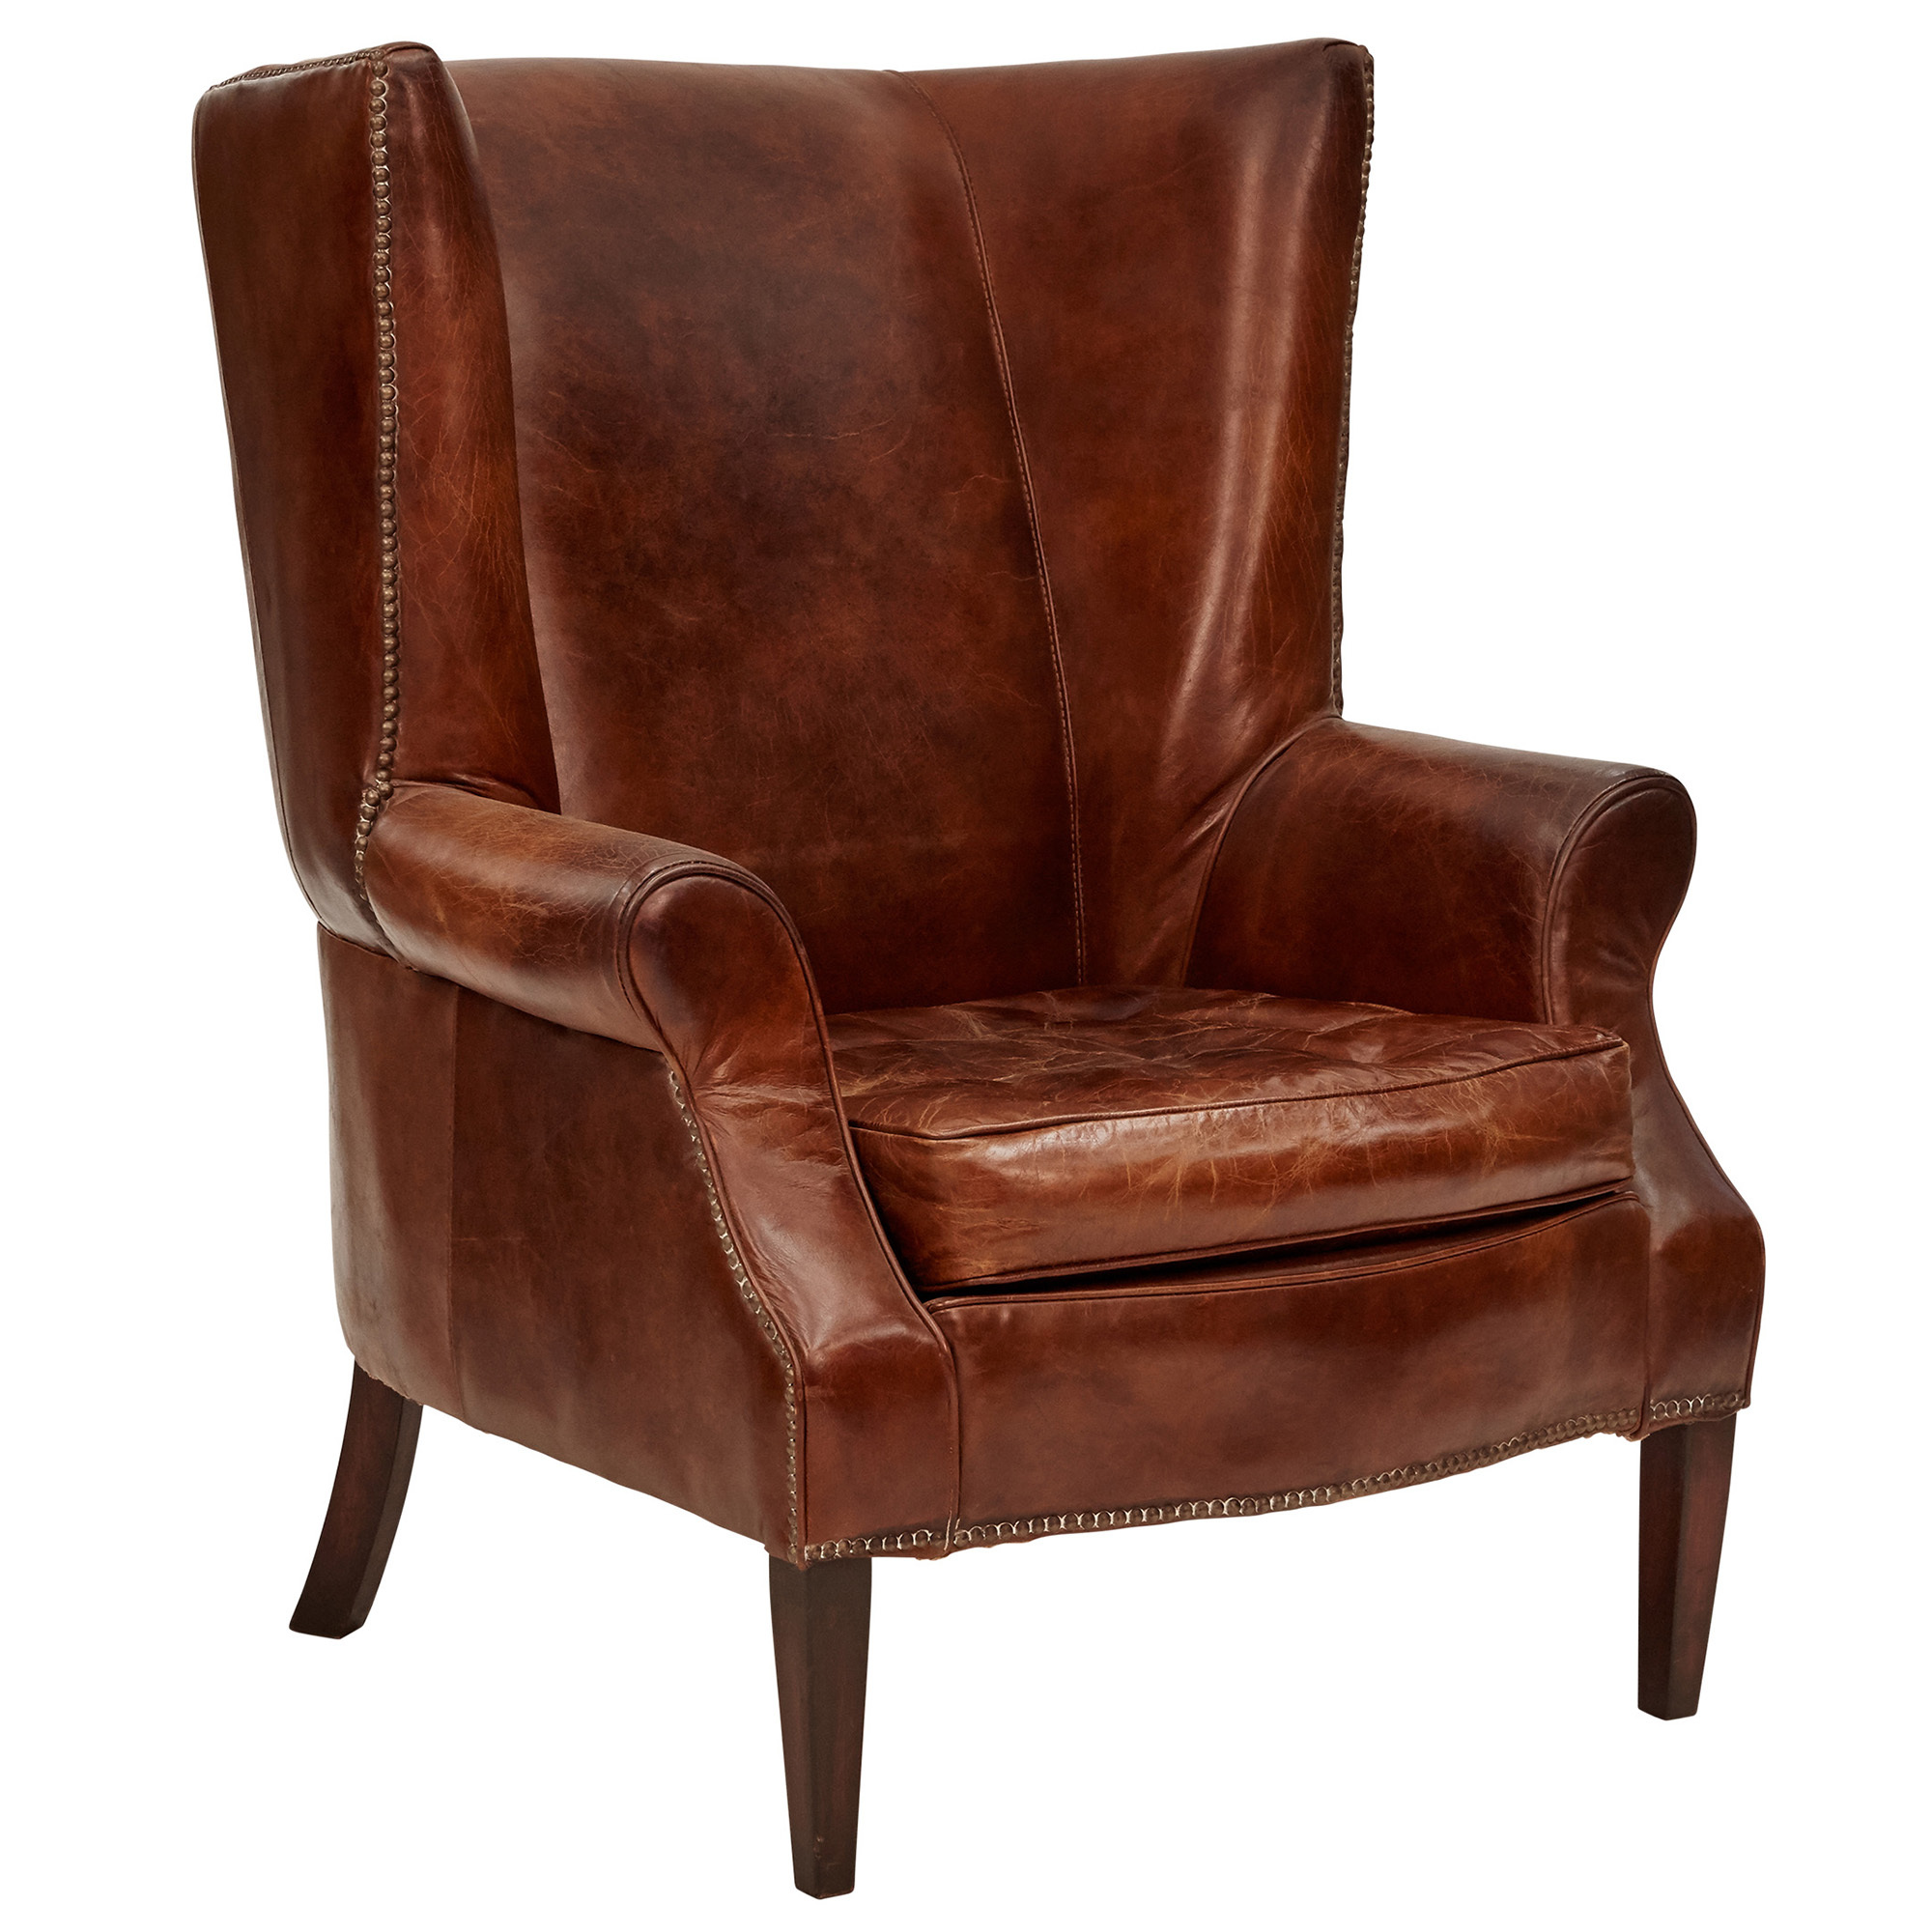 Chartwell Home Granville Leather, Brown Leather Wing Chair